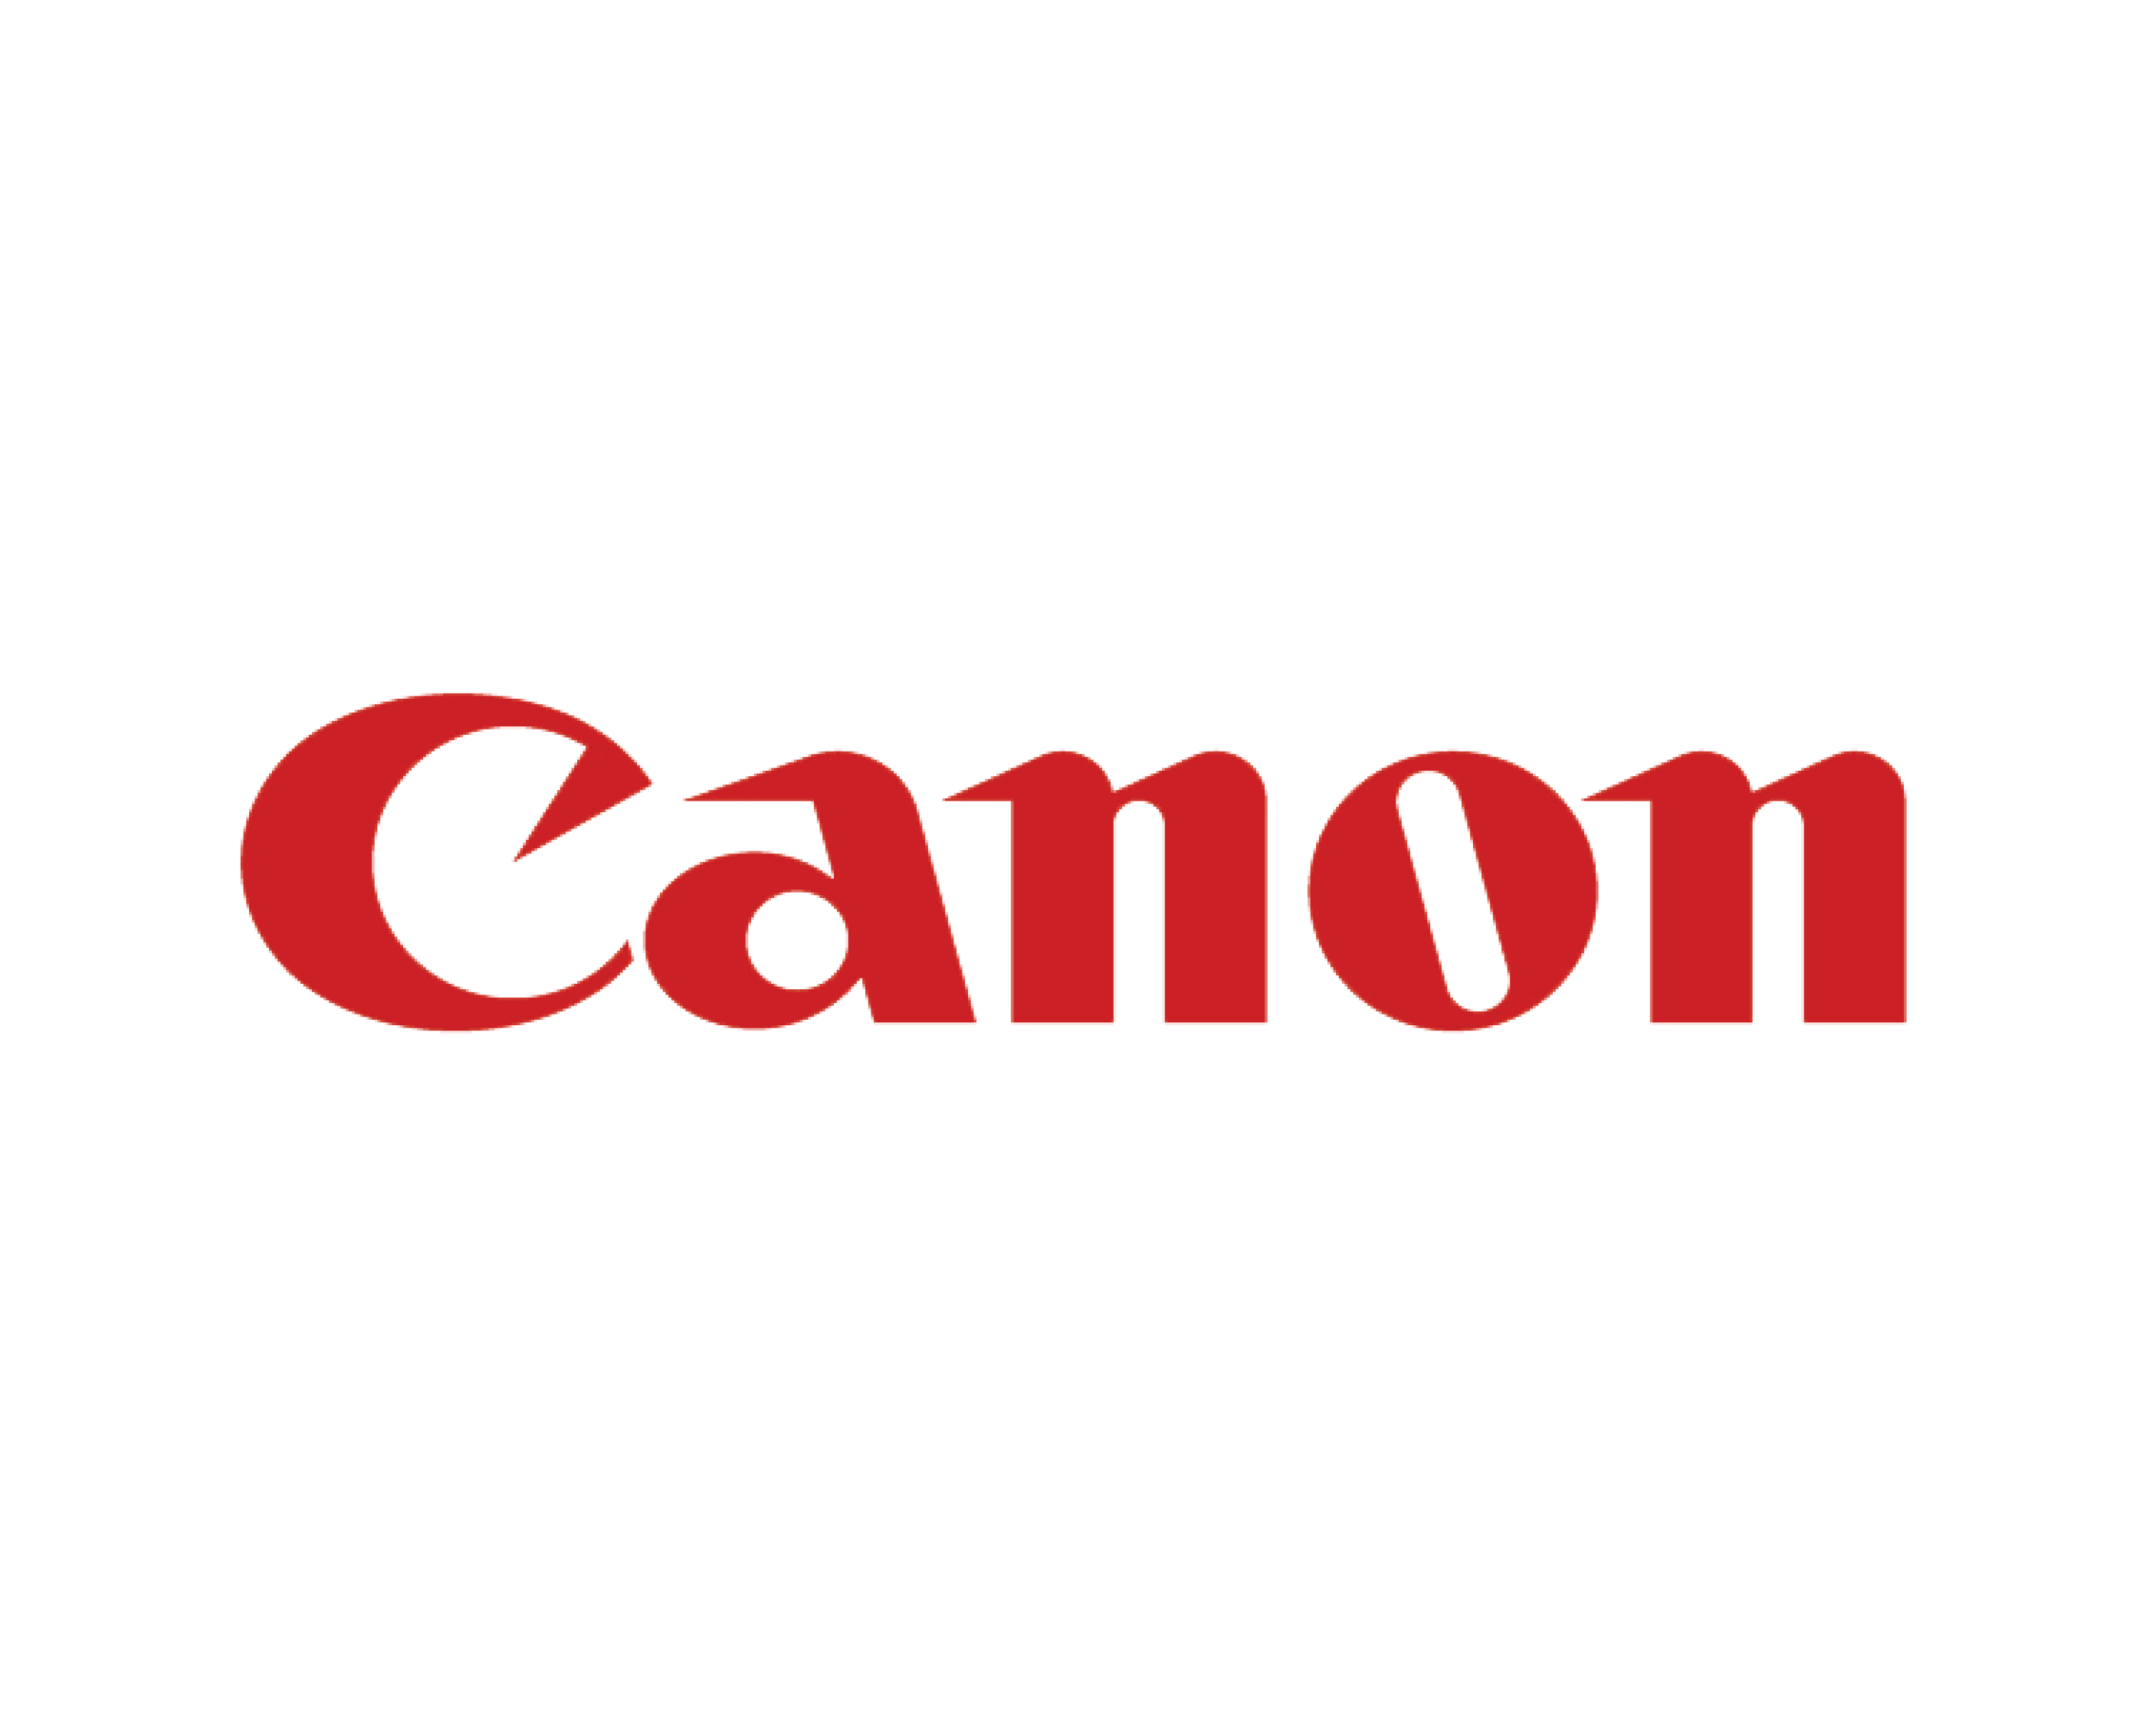 Canon Scanners